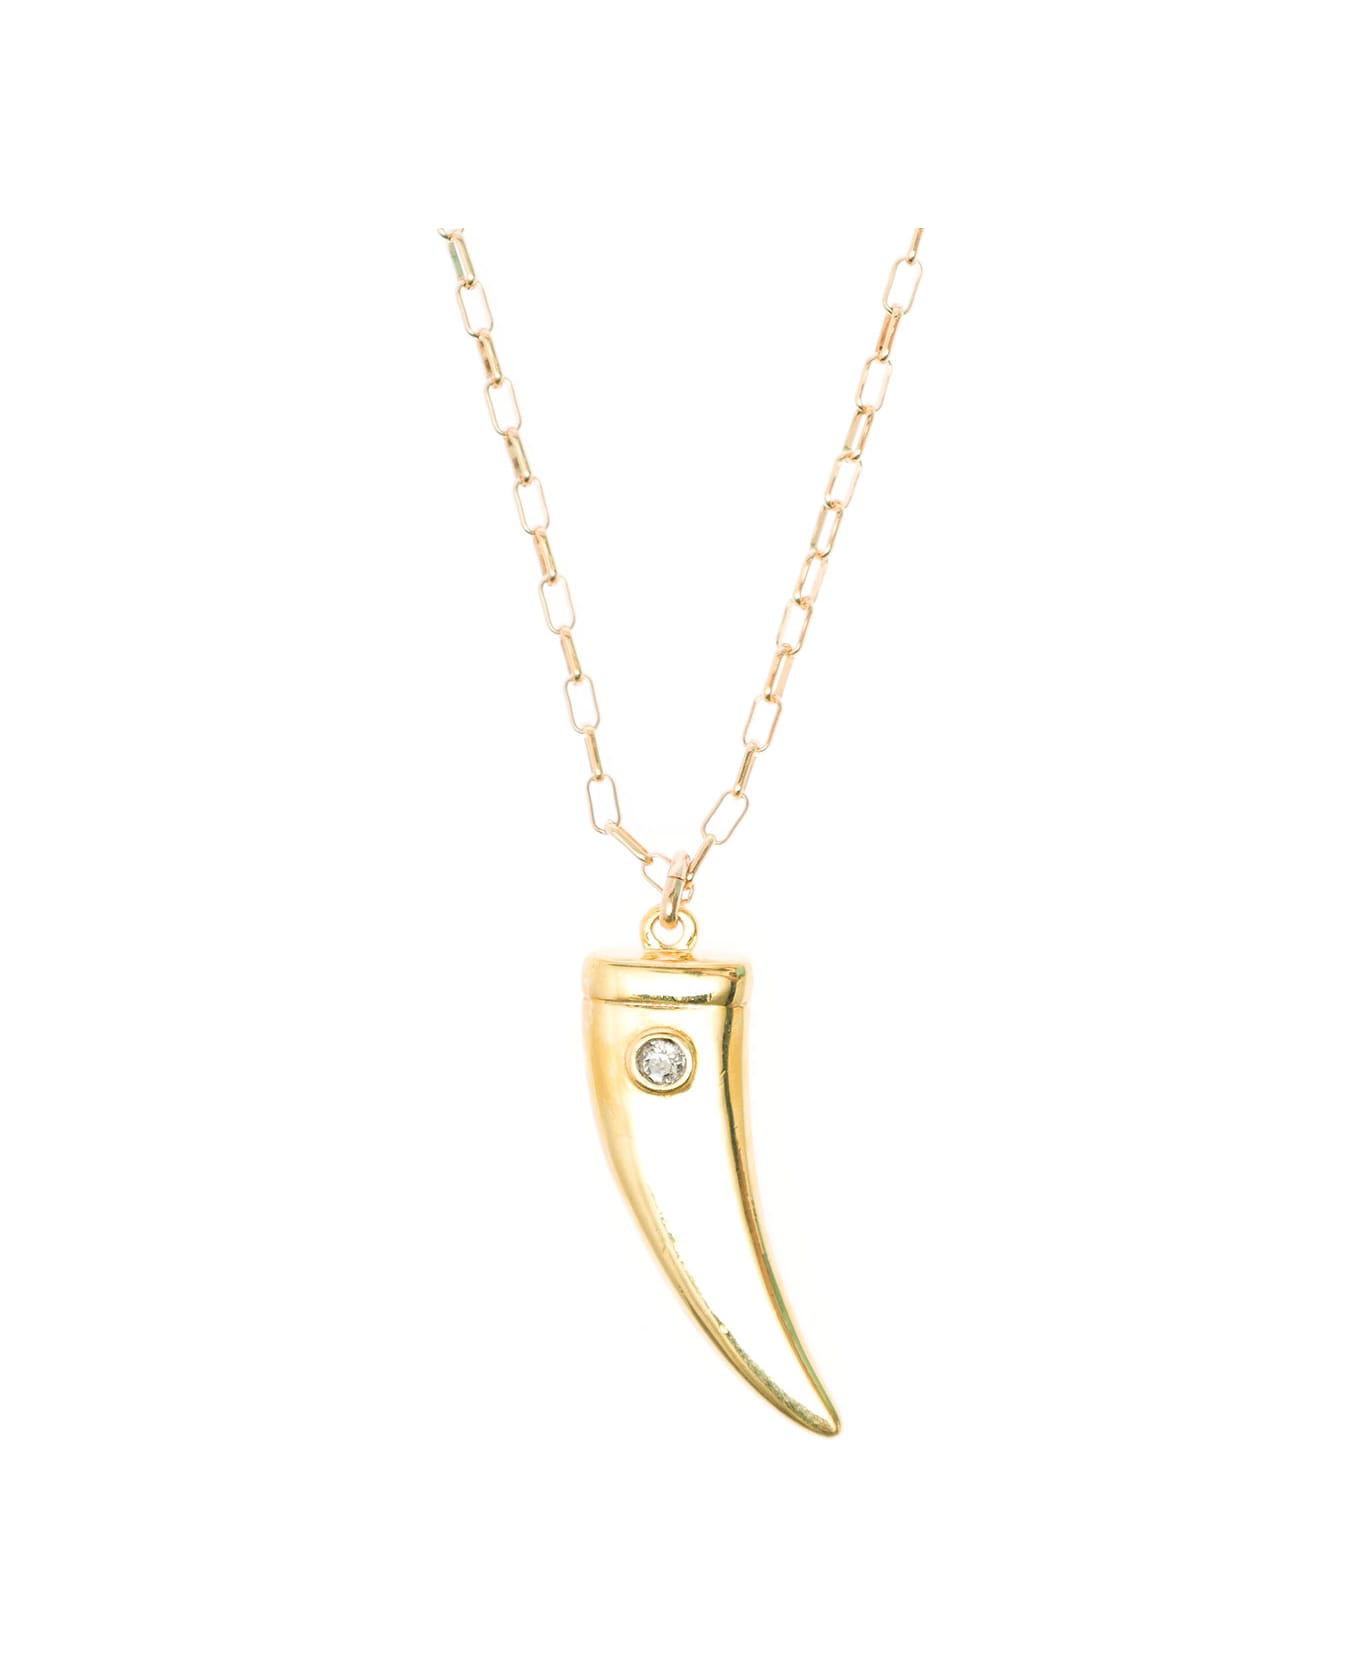 Isabel Marant Woman's Long Metal Necklace With Gold Colored Horn Pendant - Metallic